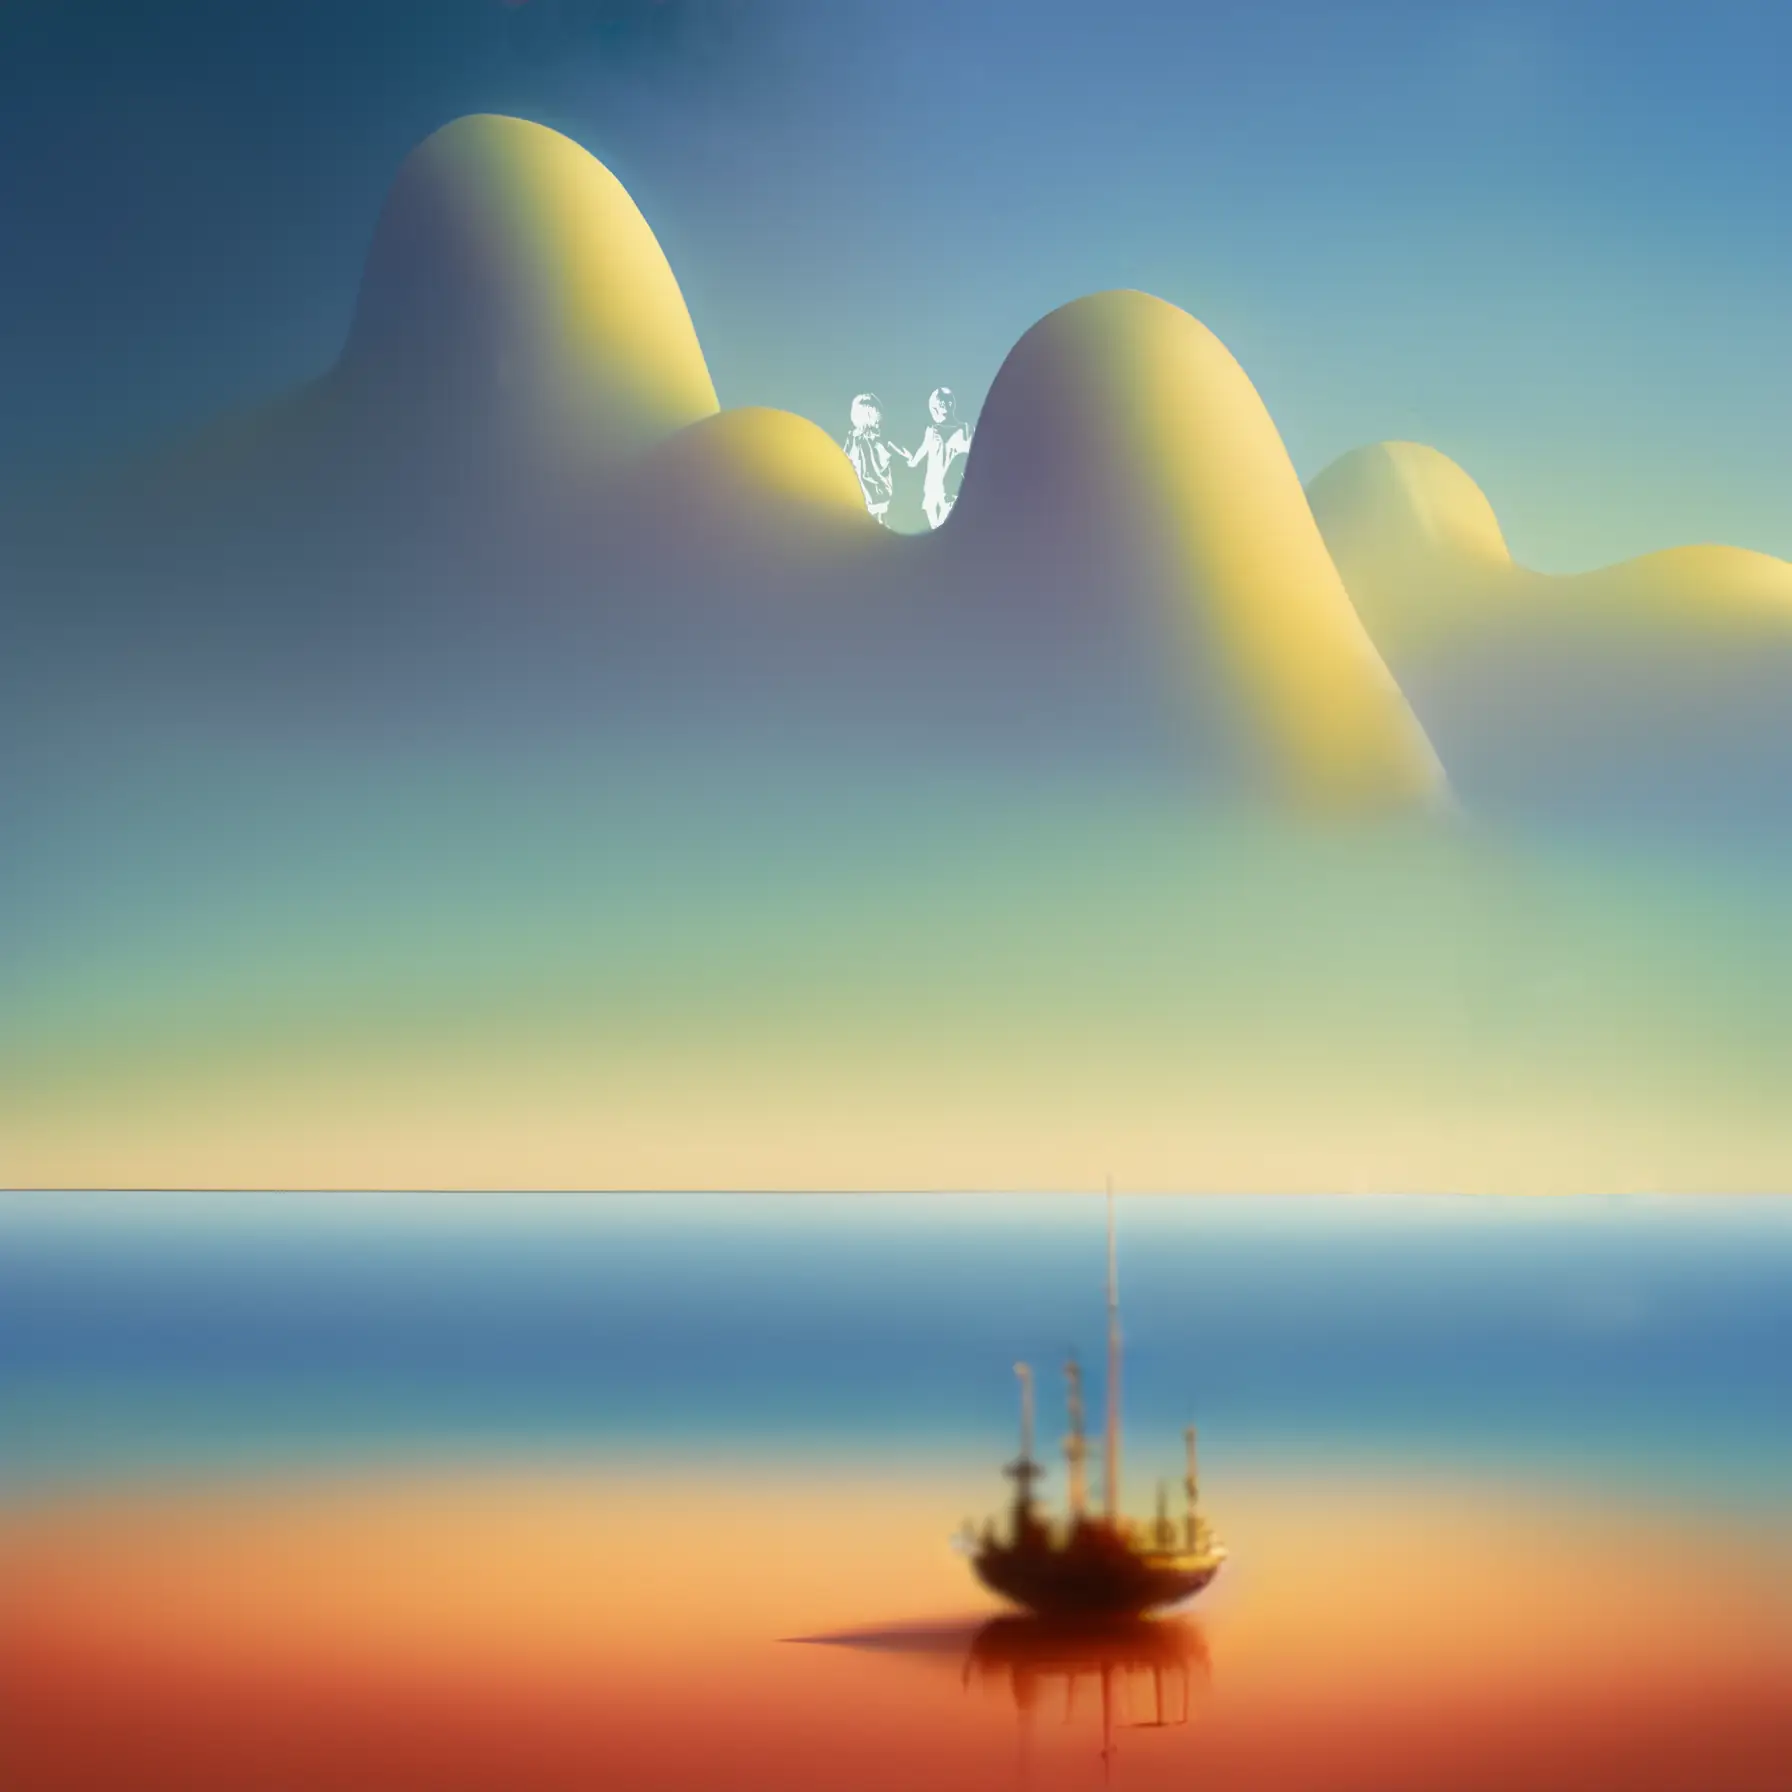 A blurry, ghostlike ship sits in a calm, fantastical setting. Multicoloured water and odd, rounded mountains in the foreground. It's a very peaceful and happy scene.